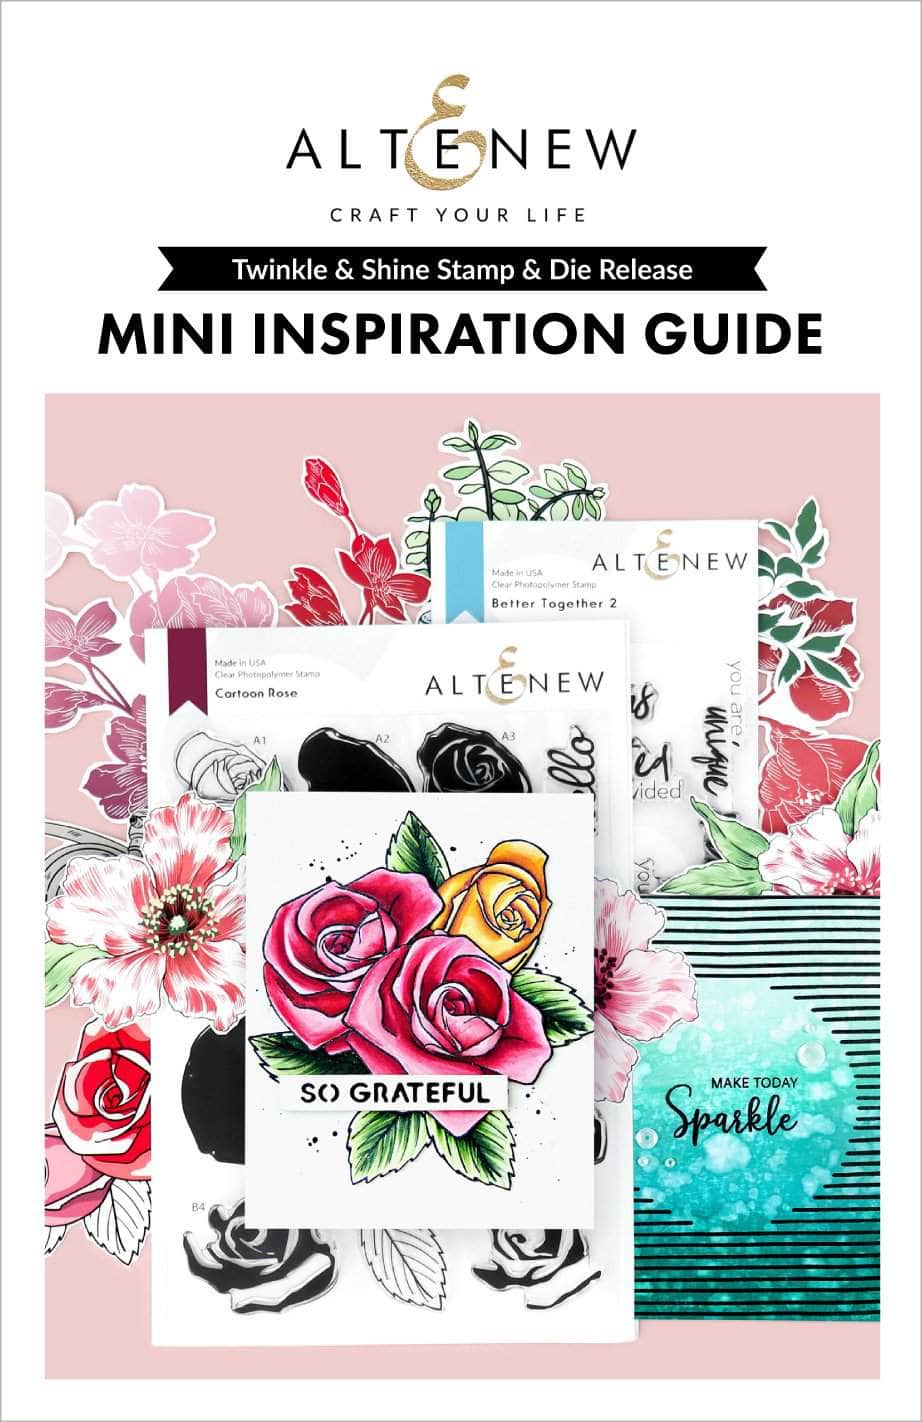 55Printing.com Printed Media Twinkle & Shine Stamp & Die Release Mini Inspiration Guide